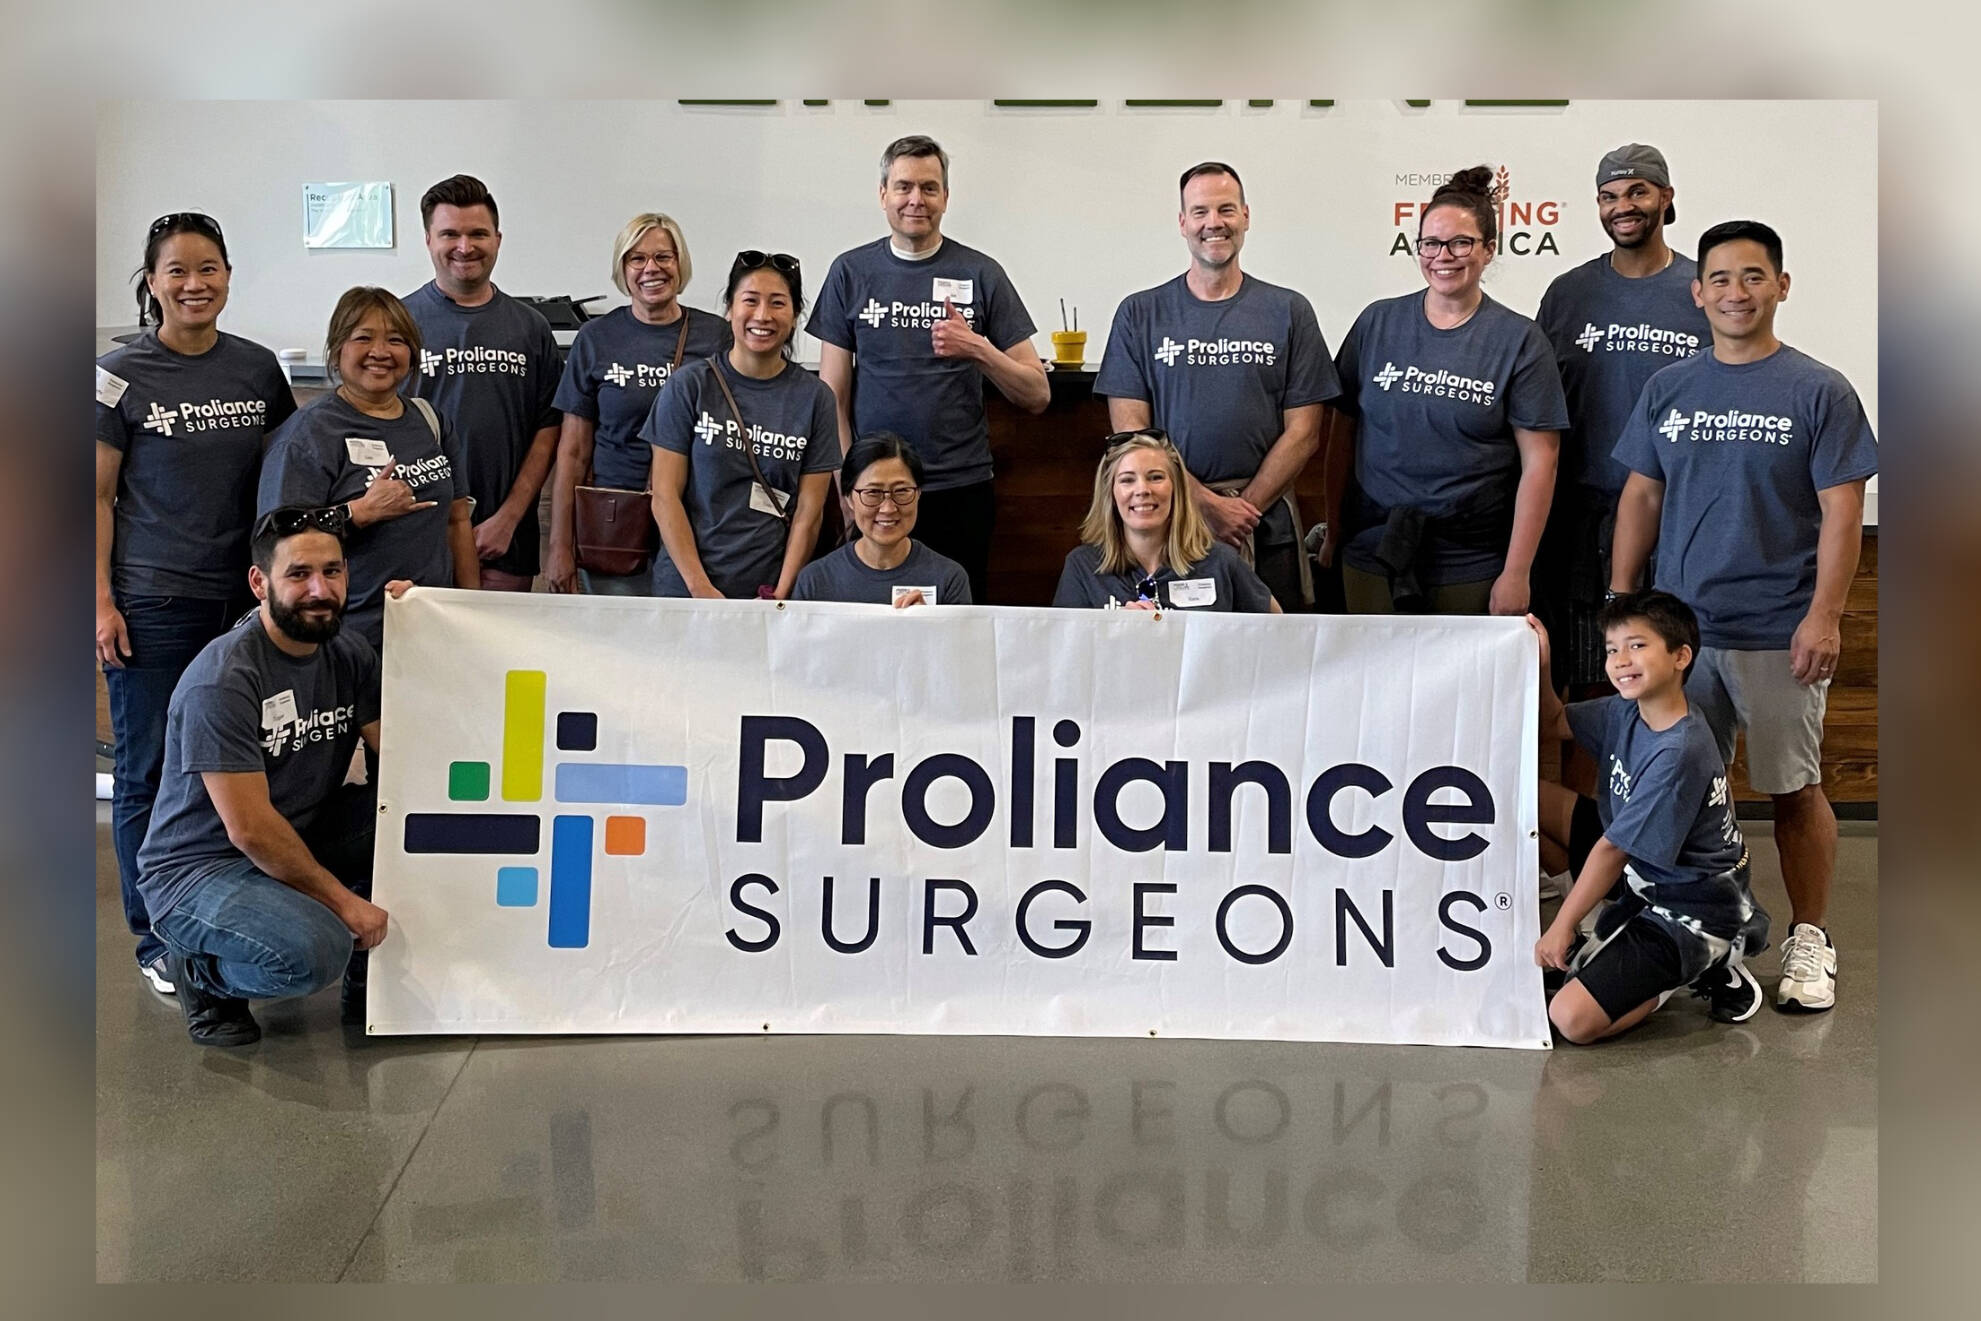 The team stays at the forefront of orthopedic innovation, employing minimally invasive techniques and advanced treatments like biologics and PRP injections. Courtesy photo by Proliance Surgeons.